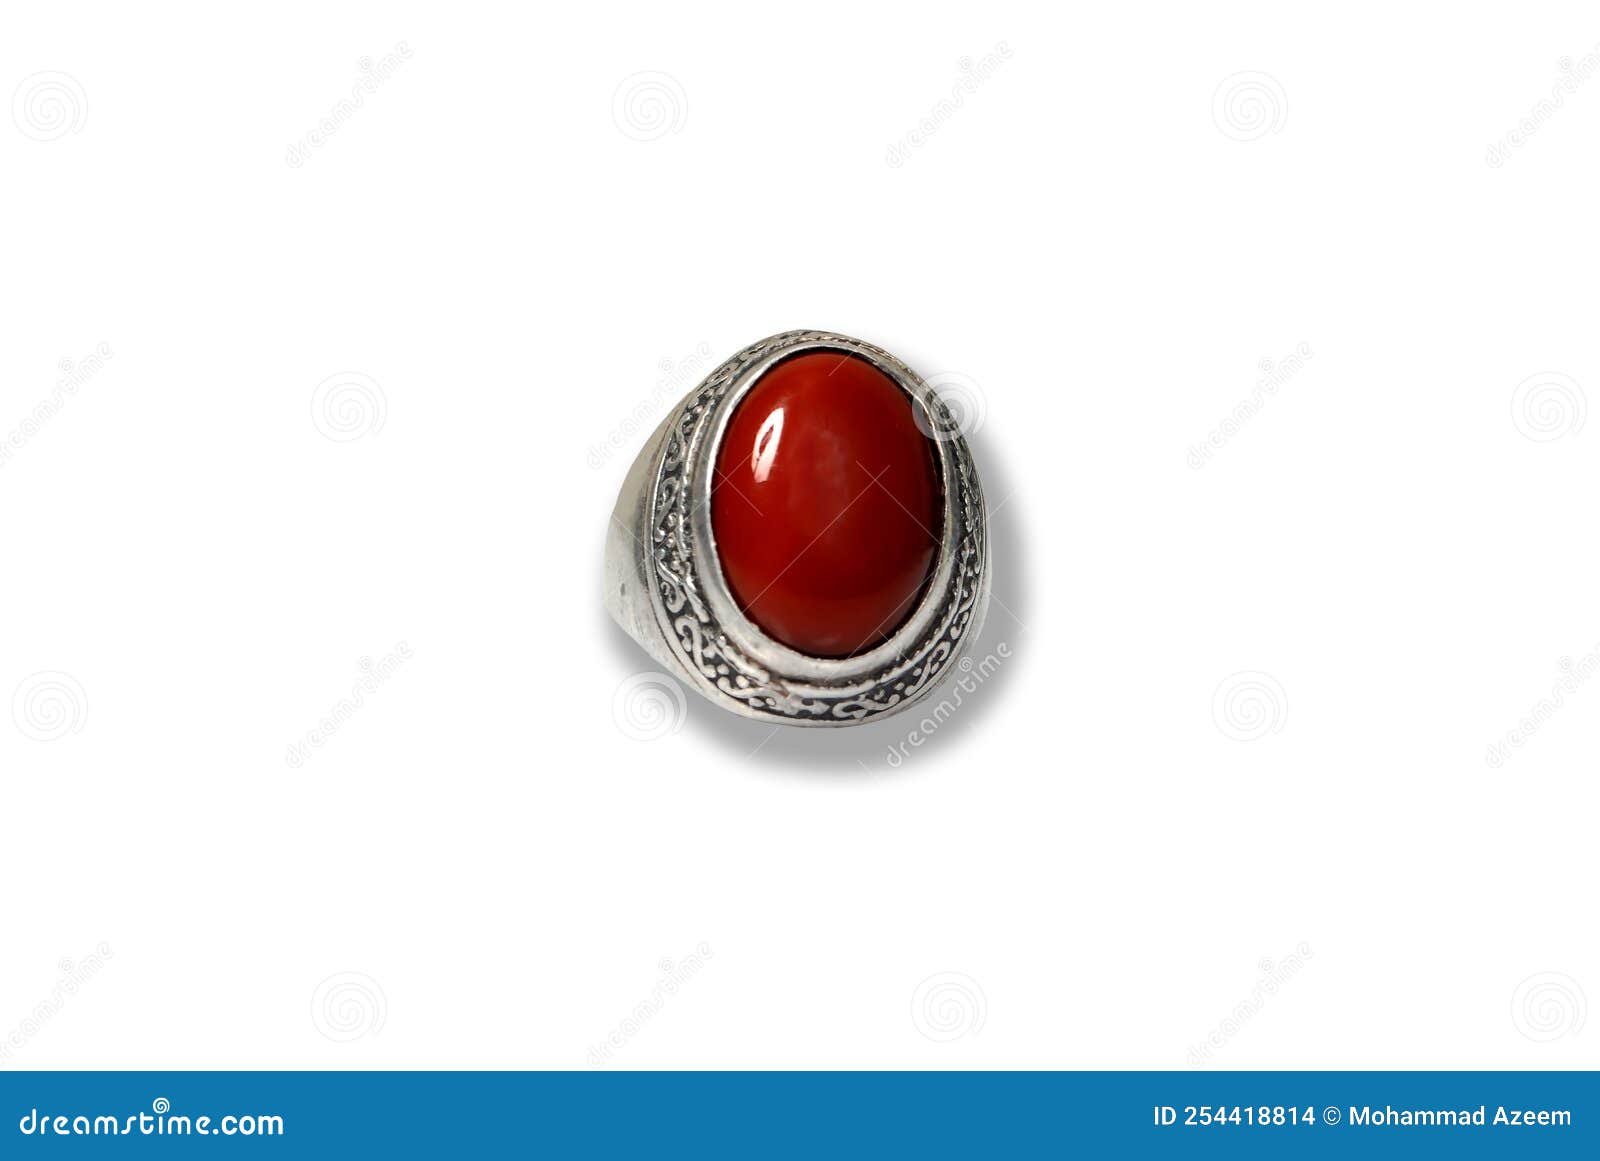 Buy 925 Sterling Silver Coral Ring for Men & Women, Red Coral Silver Ring,  Marjan Ring, Handmade Ring, Italian Coral Stone Ring Online in India - Etsy